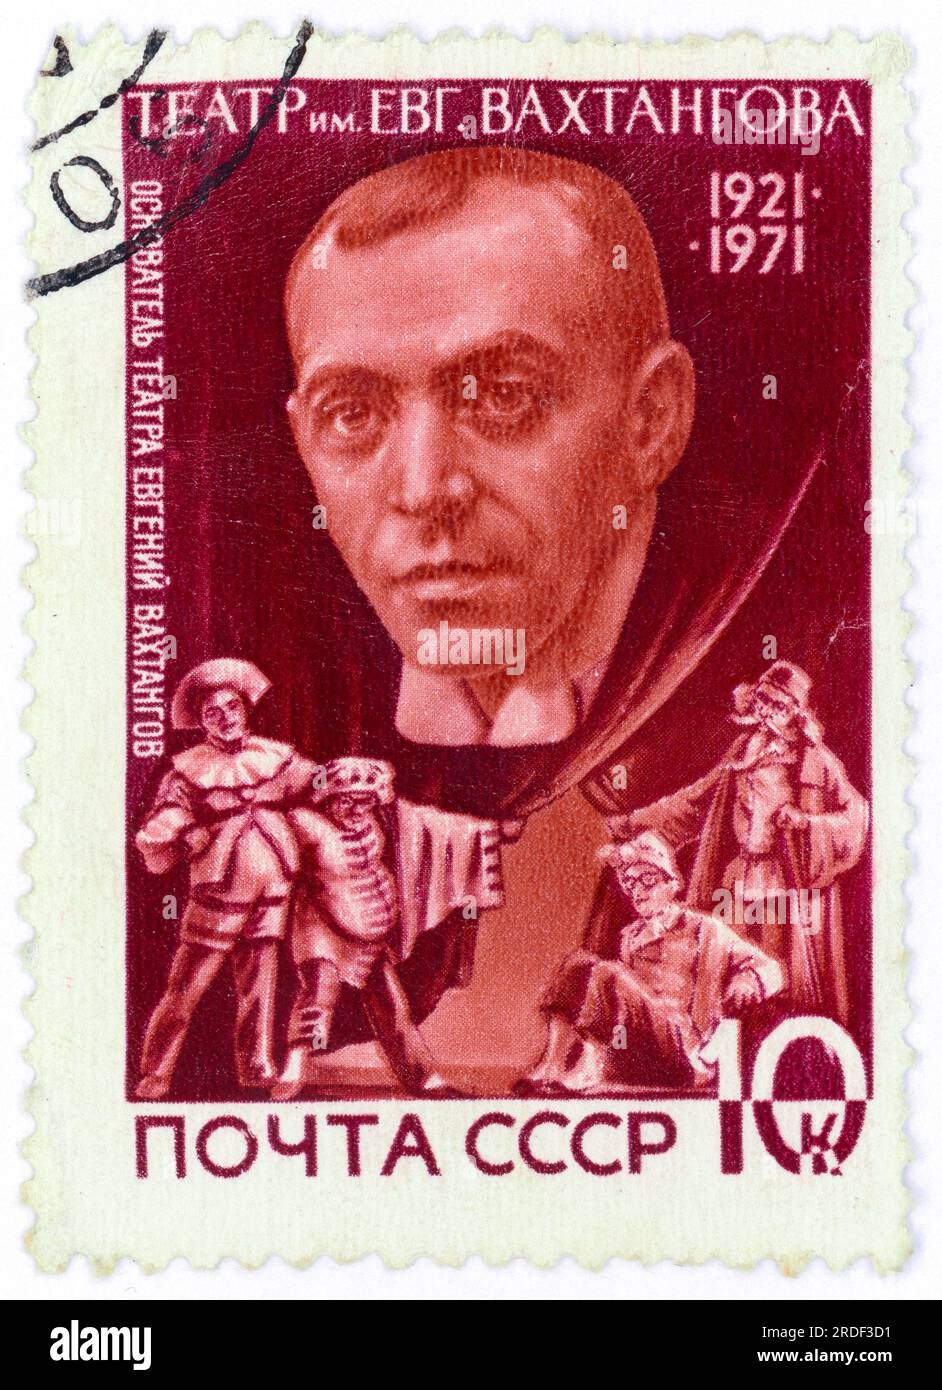 Yevgeny Vakhtangov (1883 – 1922). Postage stamp issued in the USSR in 1971. Yevgeny Bagrationovich Vakhtangov (also spelled Evgeny or Eugene; Russian: Евге́ний Багратио́нович Вахта́нгов; 1883 – 1922) was a Russian-Armenian actor and theatre director who founded the Vakhtangov Theatre. He was a friend and mentor of Michael Chekhov. He is known for his distinctive style of theatre, his most notable production being Princess Turandot in 1922. Stock Photo